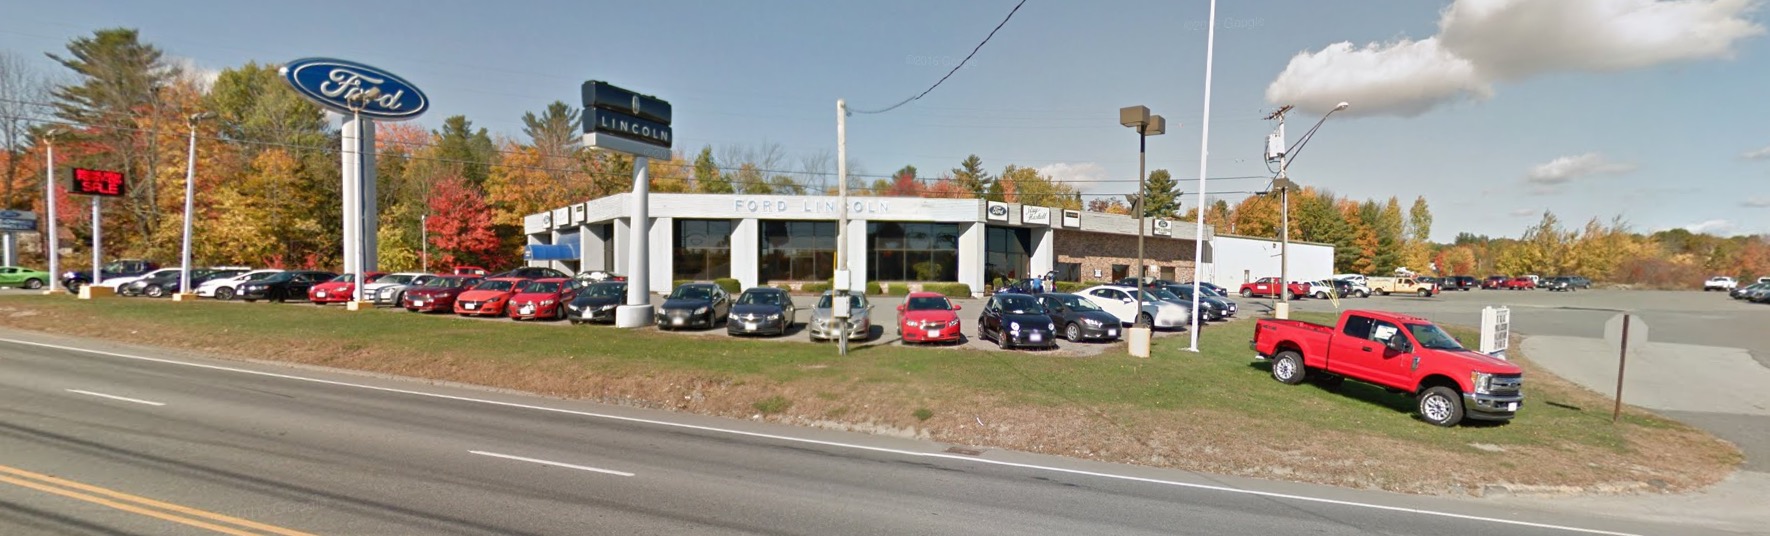 Ray Haskell Ford Lincoin Maine